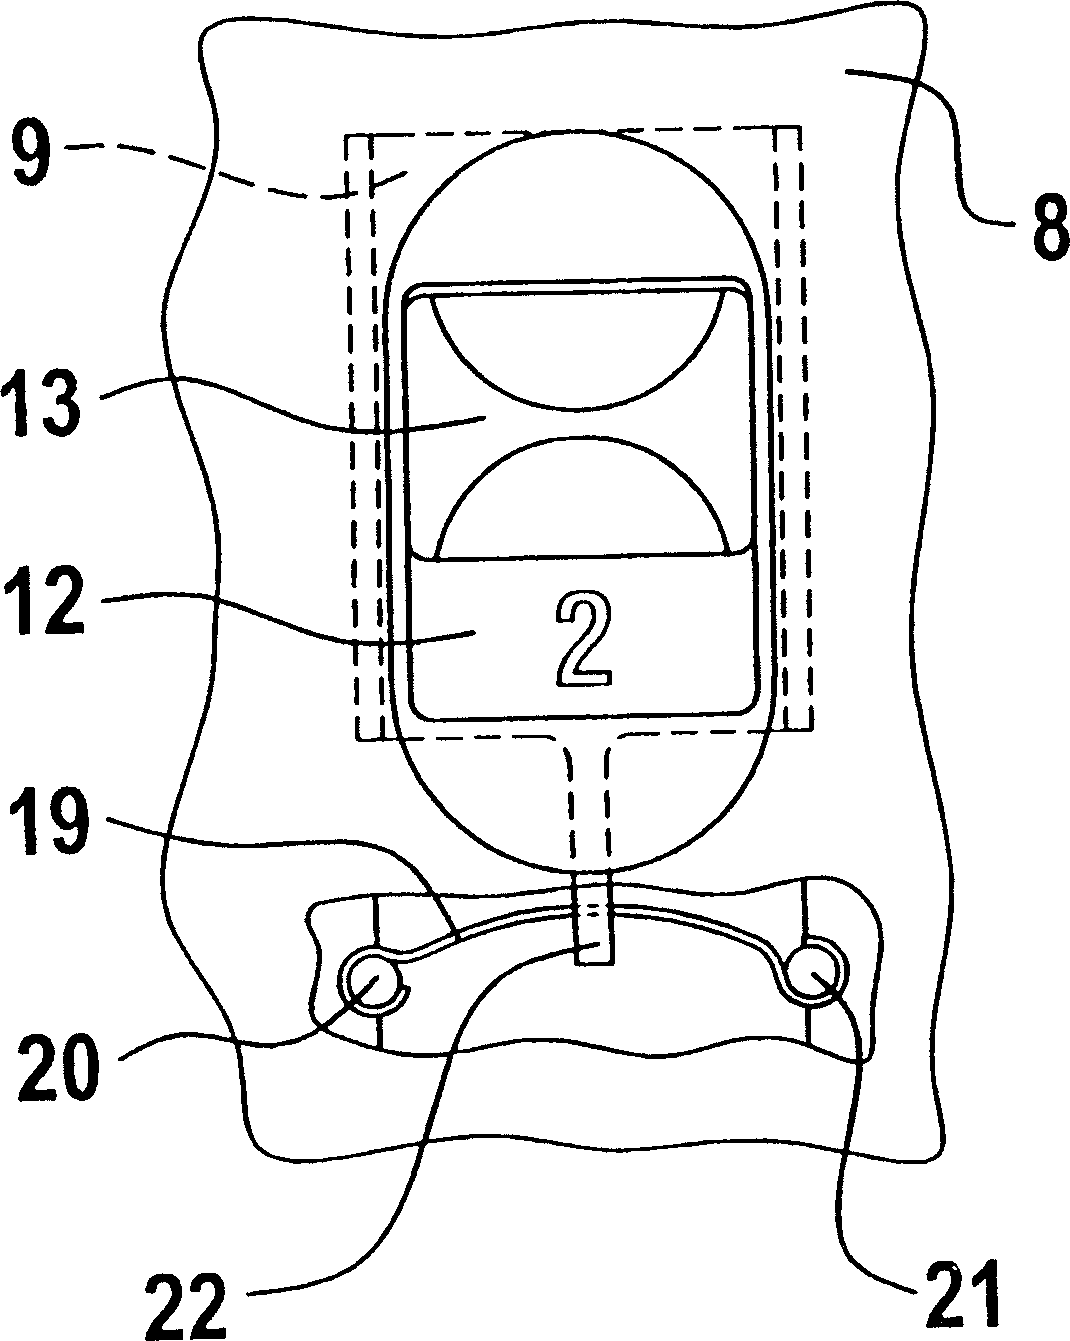 Two-stage speed variator device for converting electric tool